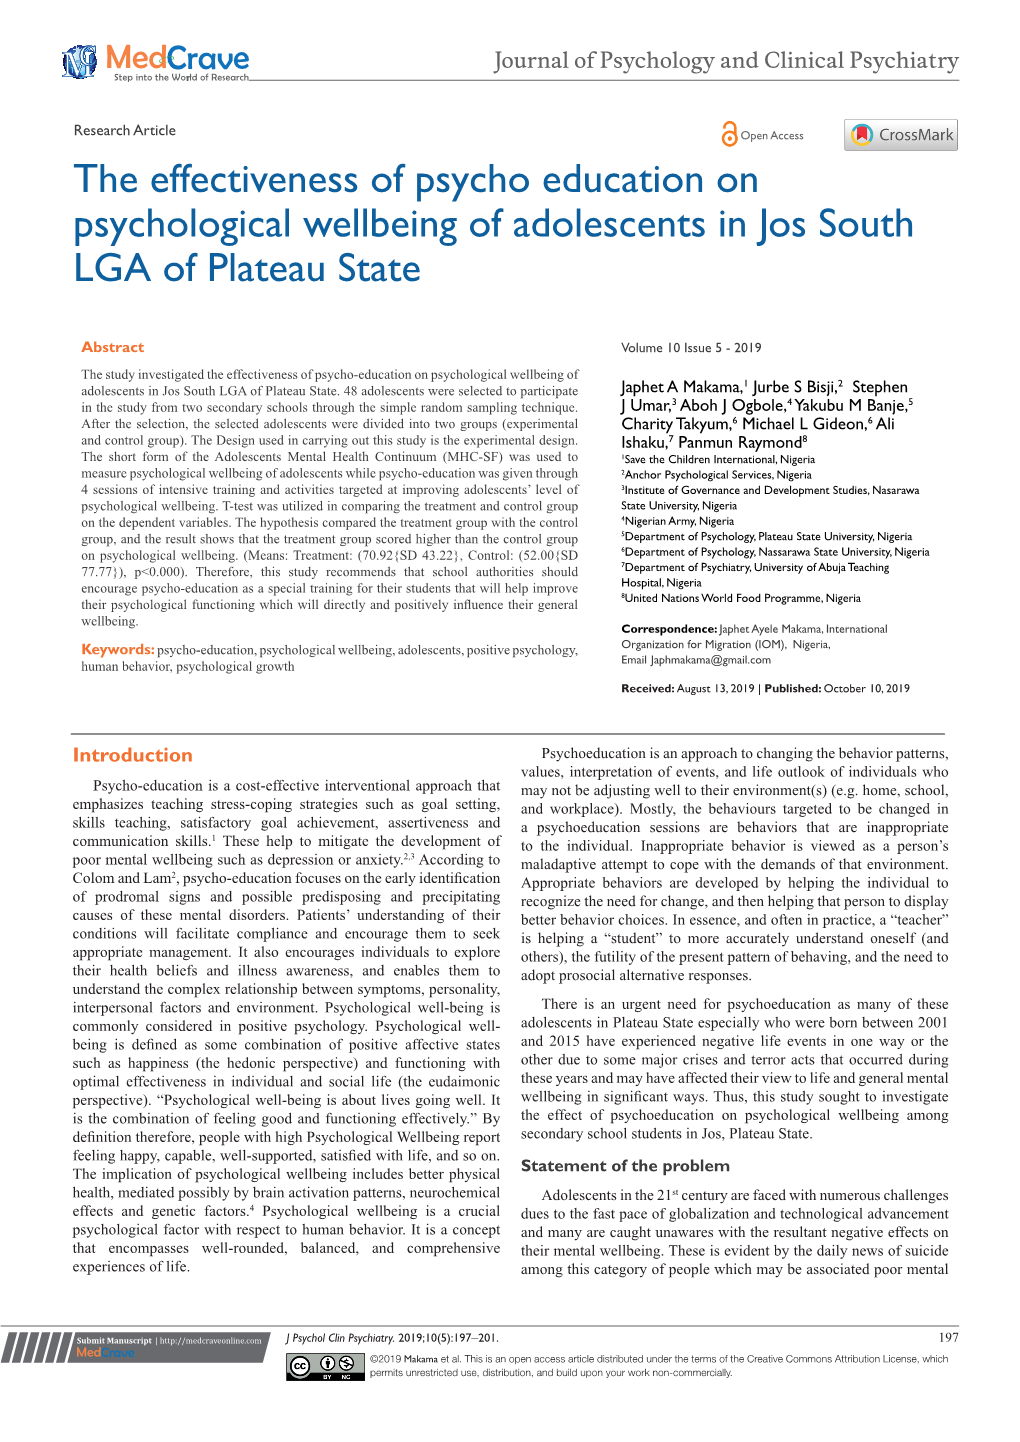 The Effectiveness of Psycho Education on Psychological Wellbeing of Adolescents in Jos South LGA of Plateau State